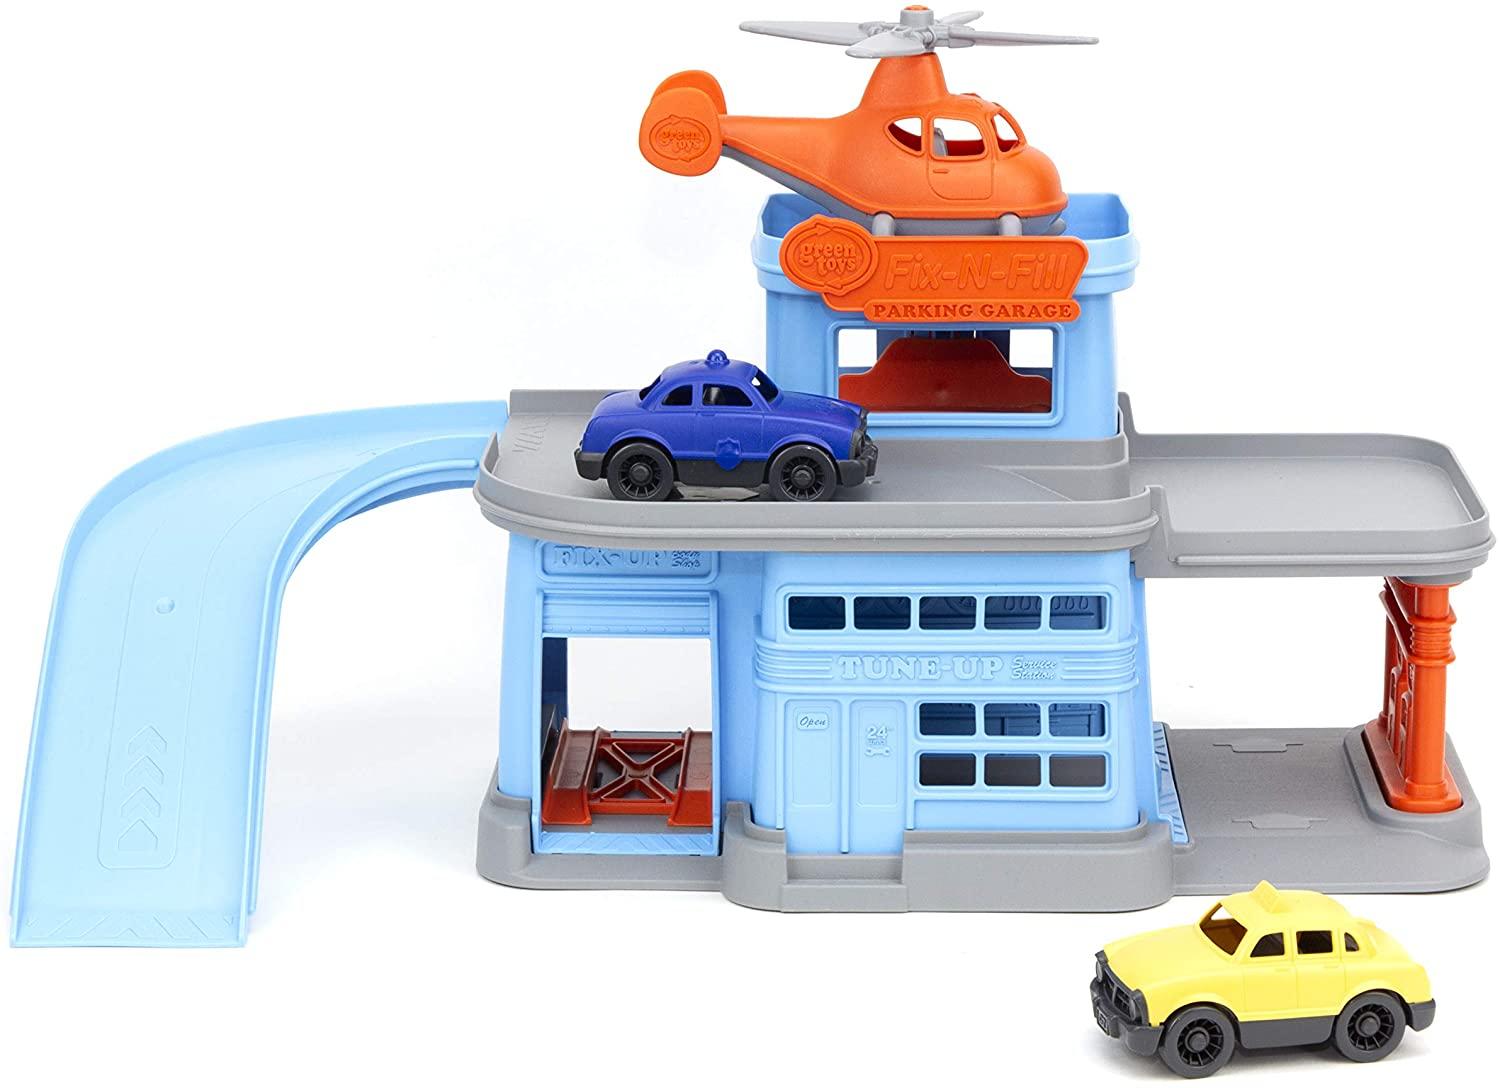 Toy parking garage with ramp, helicopter on helipad, a yellow taxi and blue police car all made from 100% recycled plastic.